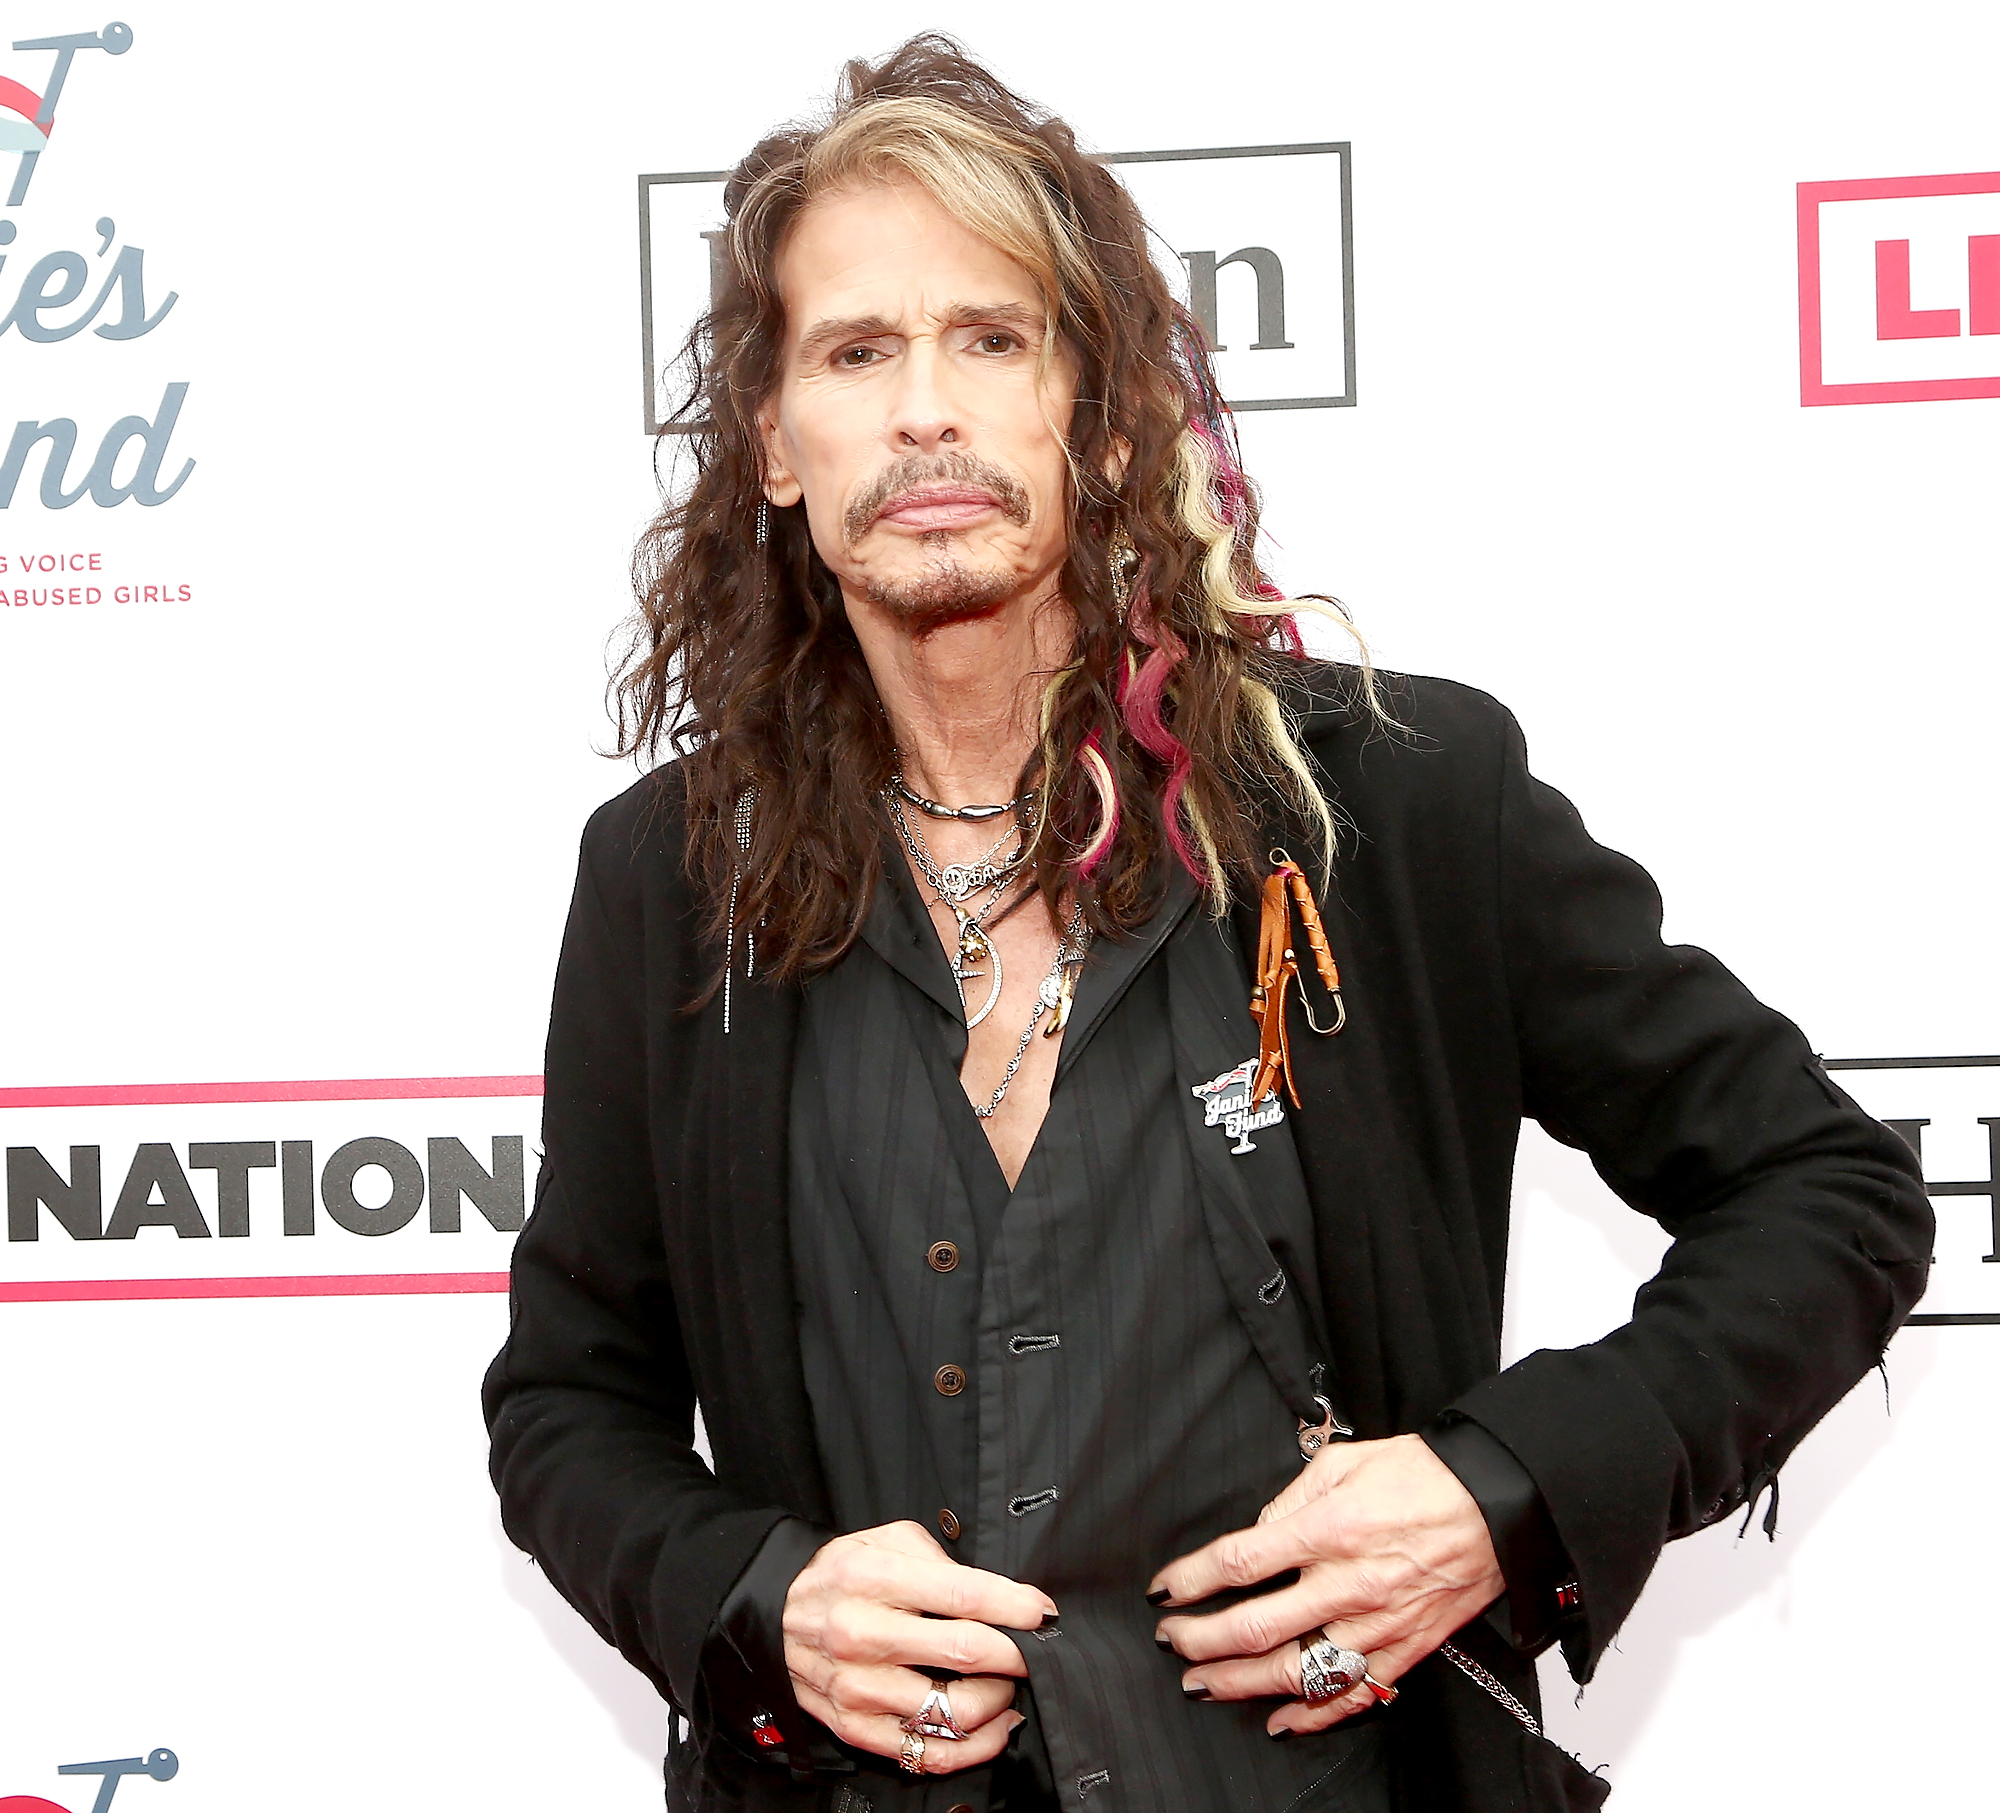 Steven Tyler Makes Some Beautiful Offspring (LOTS of Pics) - The JJB